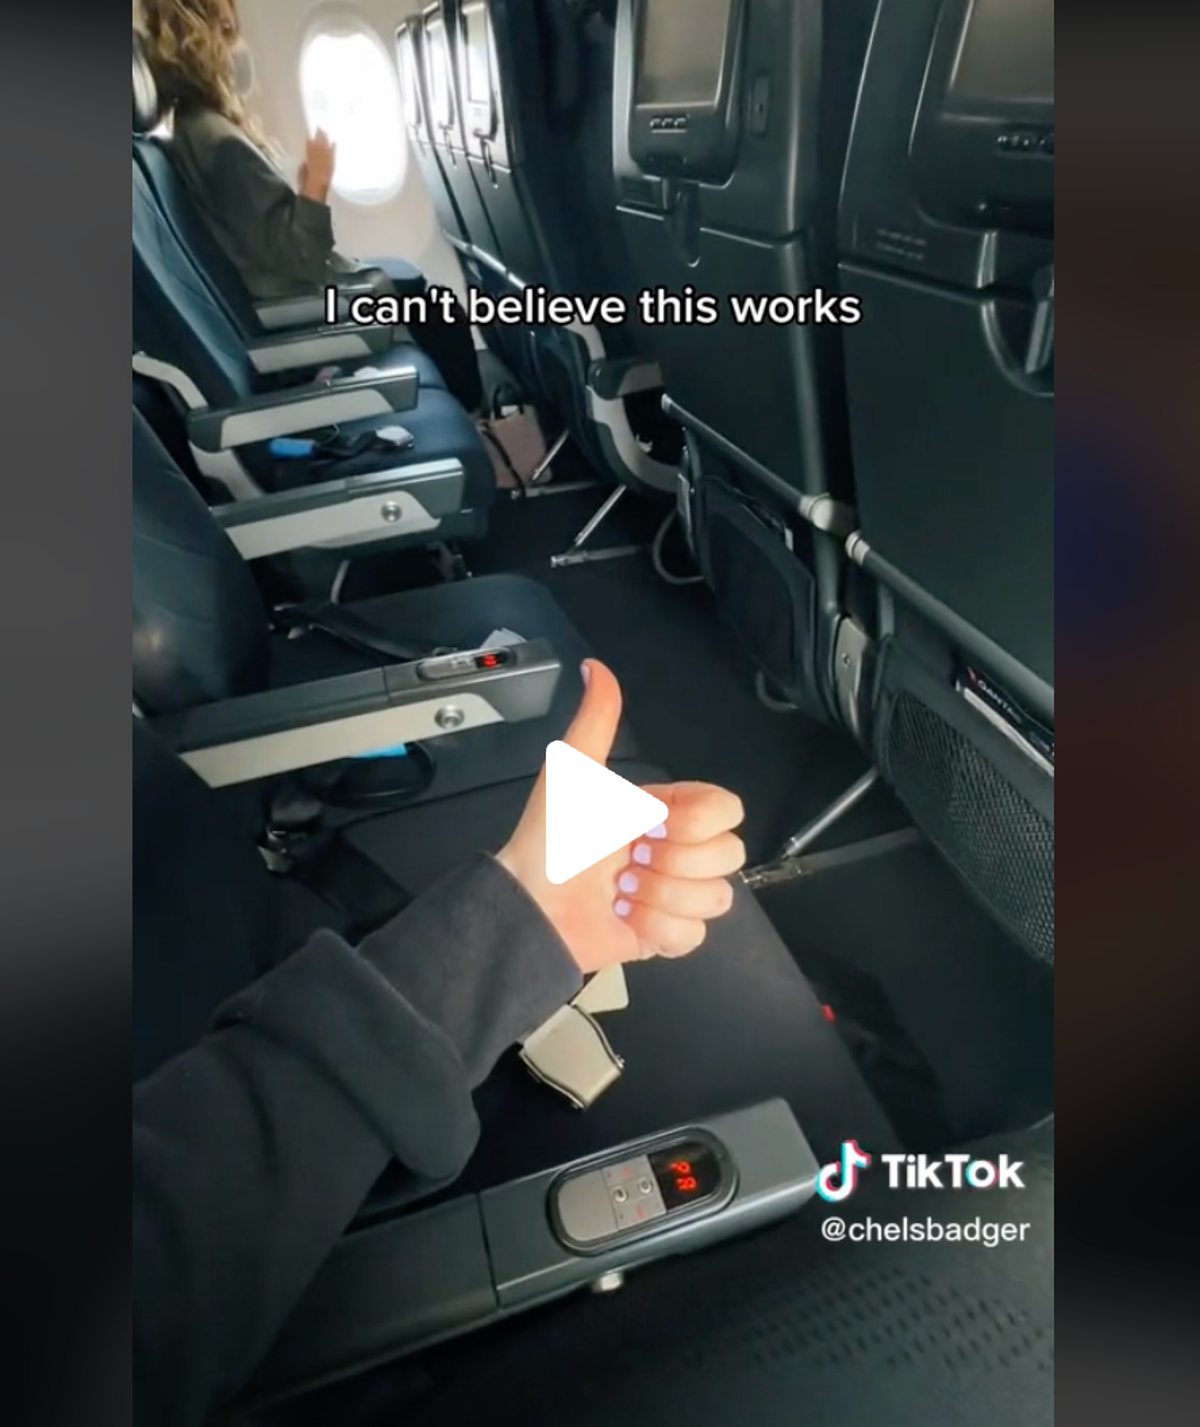 Traveller shares Qantas flight hack for getting full row of seats to yourself